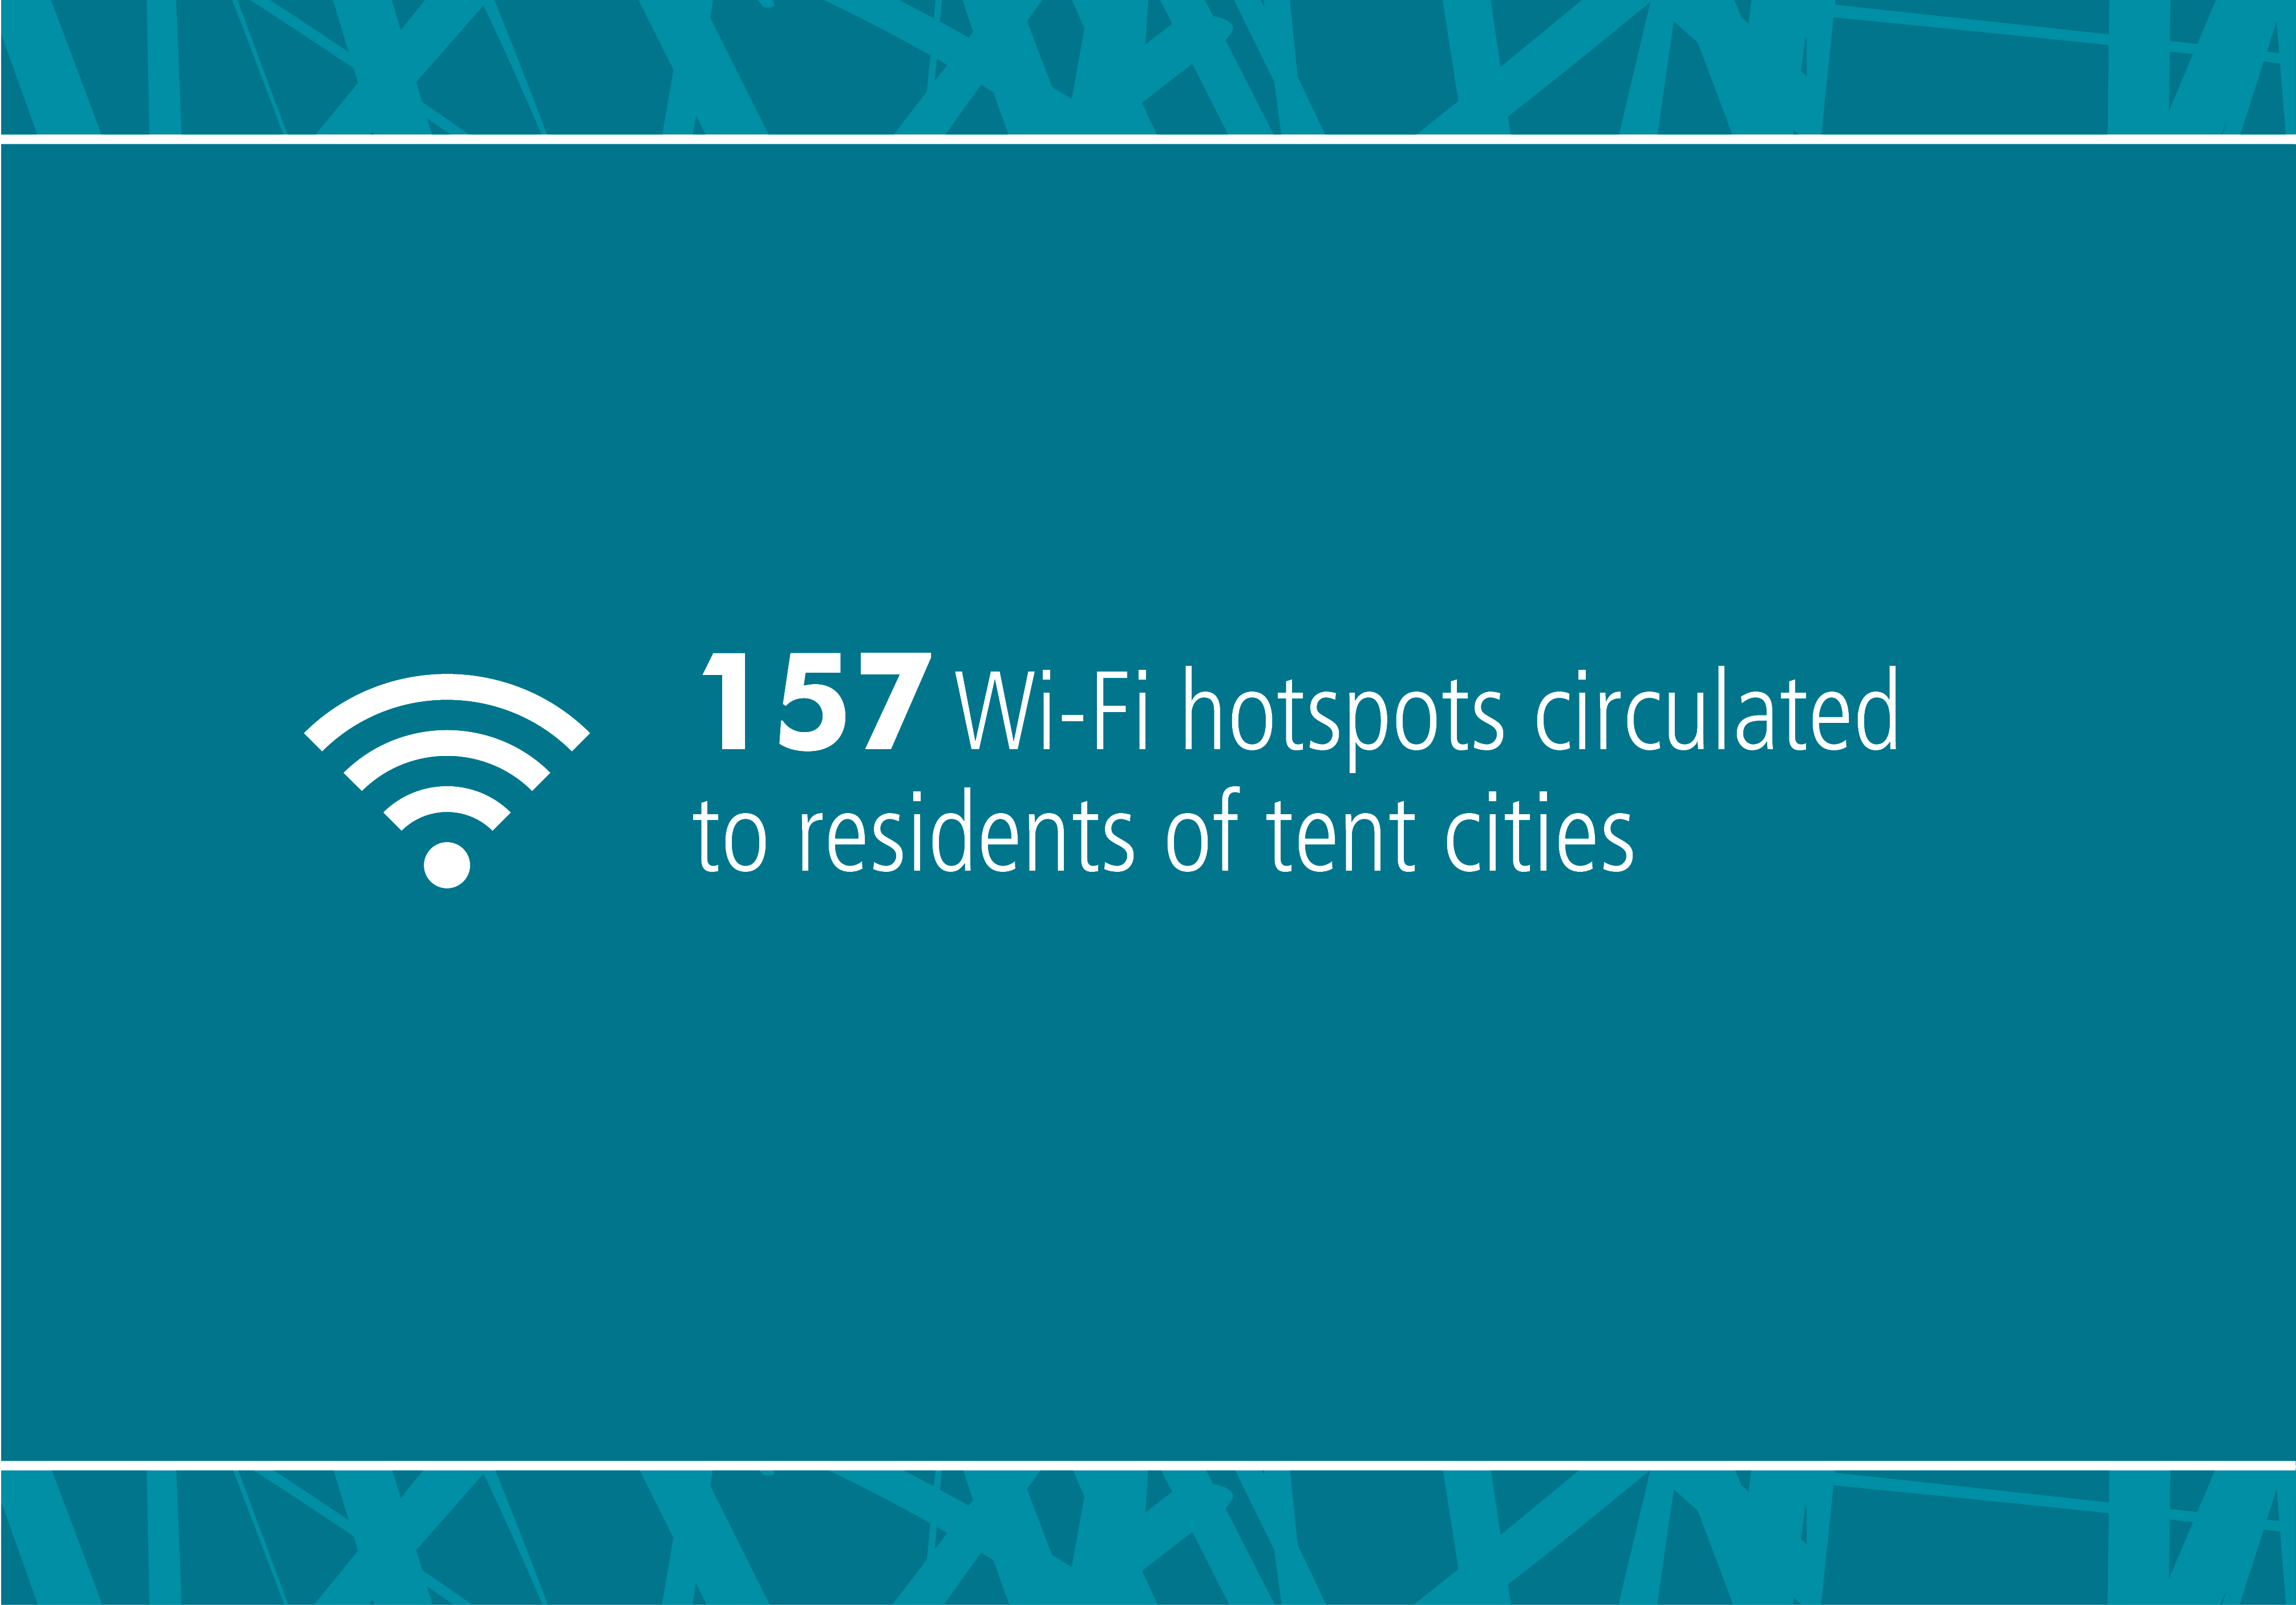 157 Wi-Fi hotspots circulated to residents of tent cities in 2018